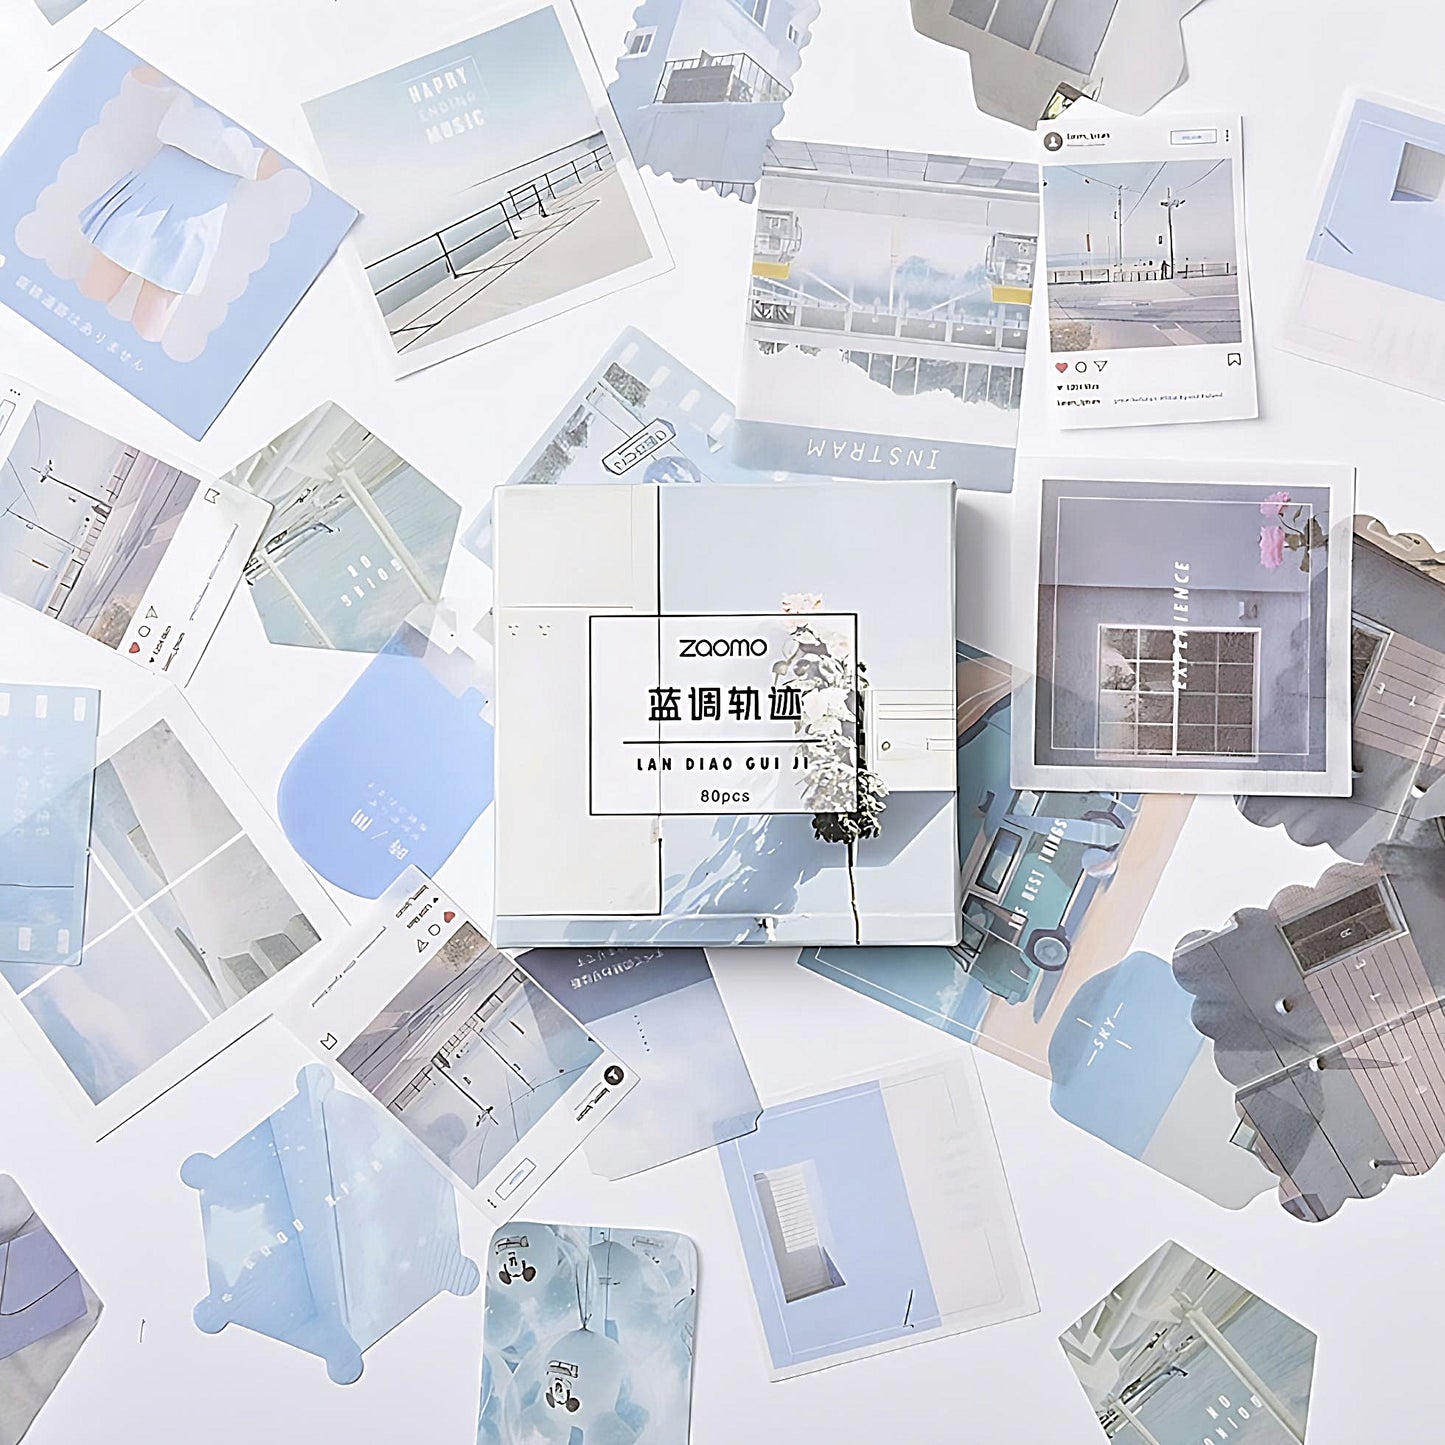 photo stickers in blue color on a white background